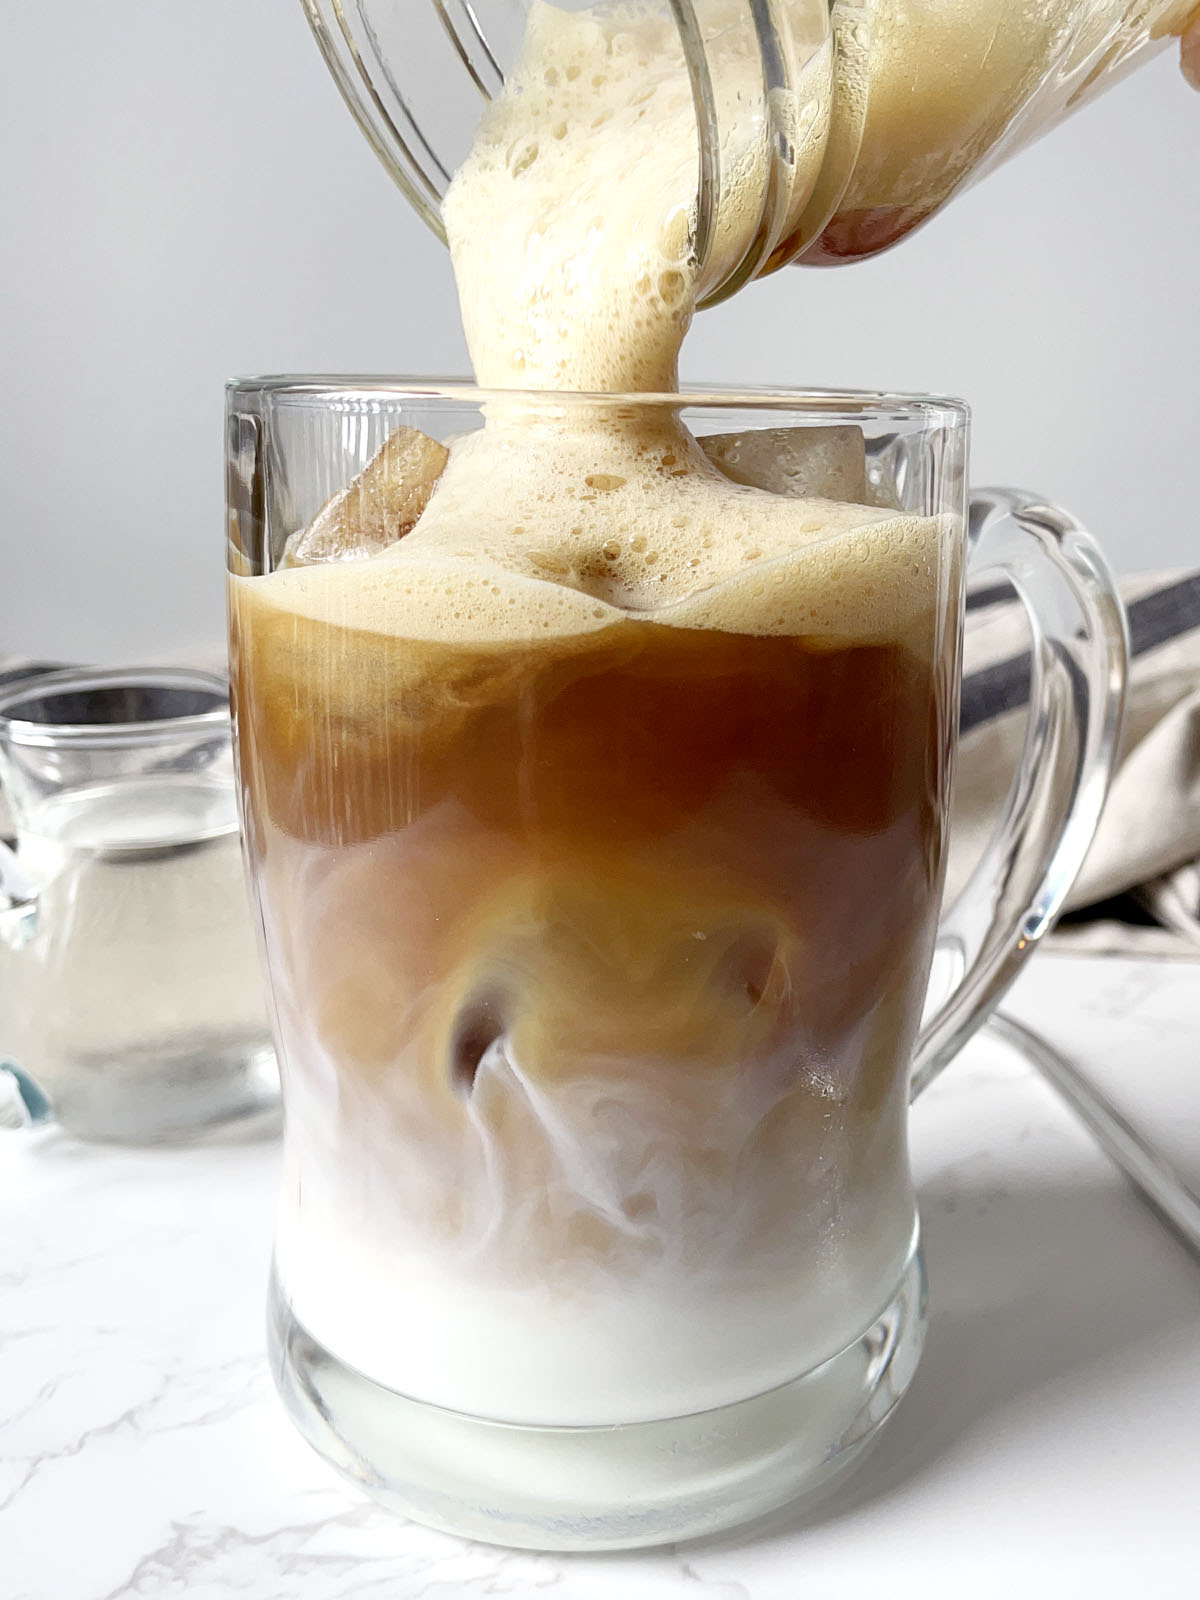 Light brown foam being poured from a glass jar into a glass mug containing white milk and brown coffee.